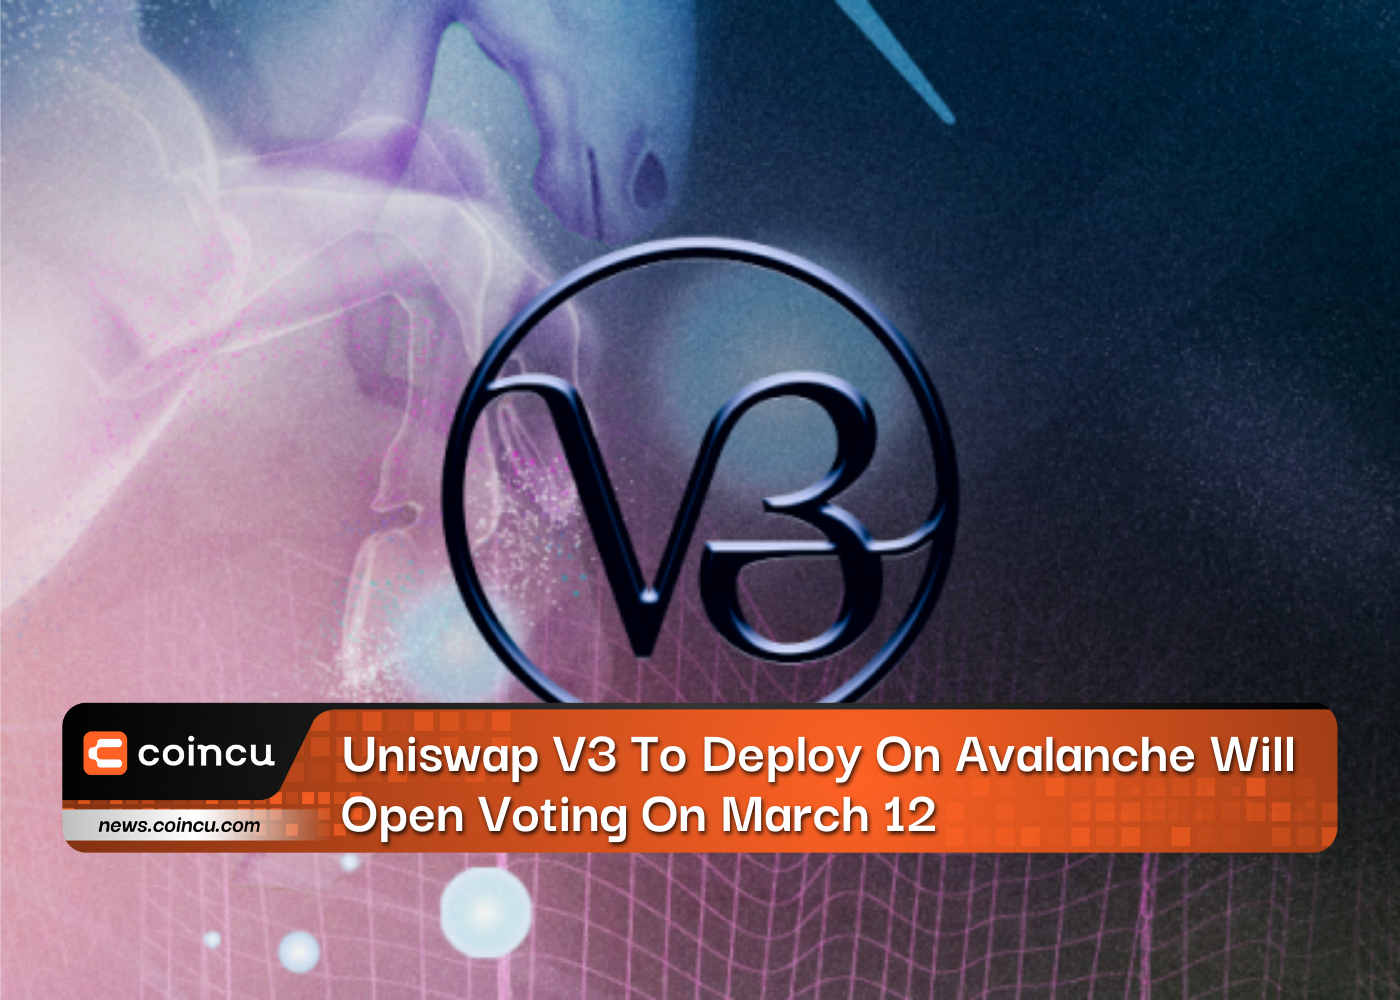 Uniswap V3 To Deploy On Avalanche Will Open Voting On March 12